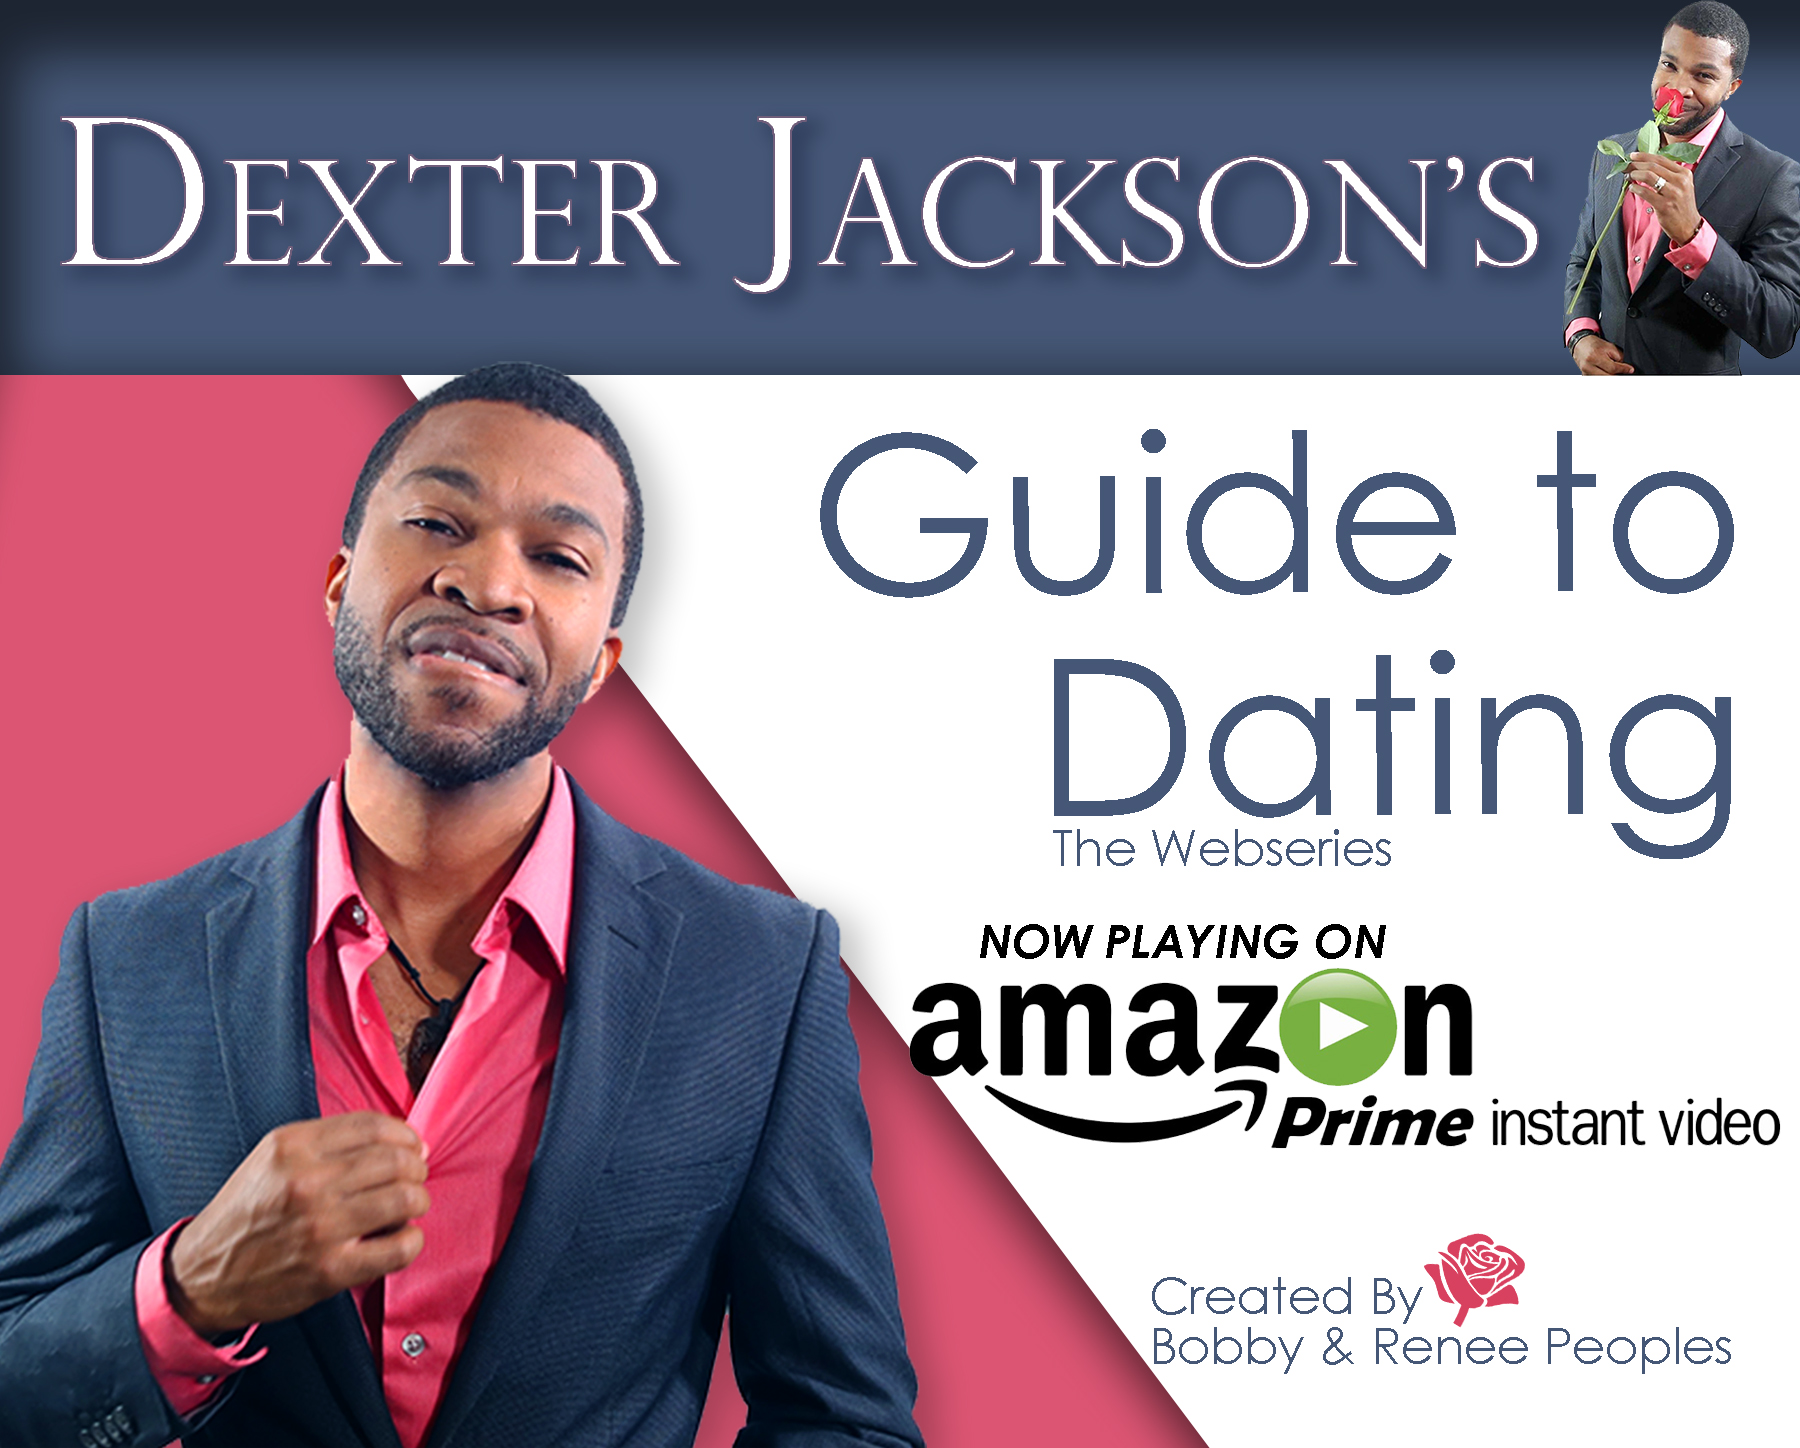 Dexter Jackson's Guide to Dating